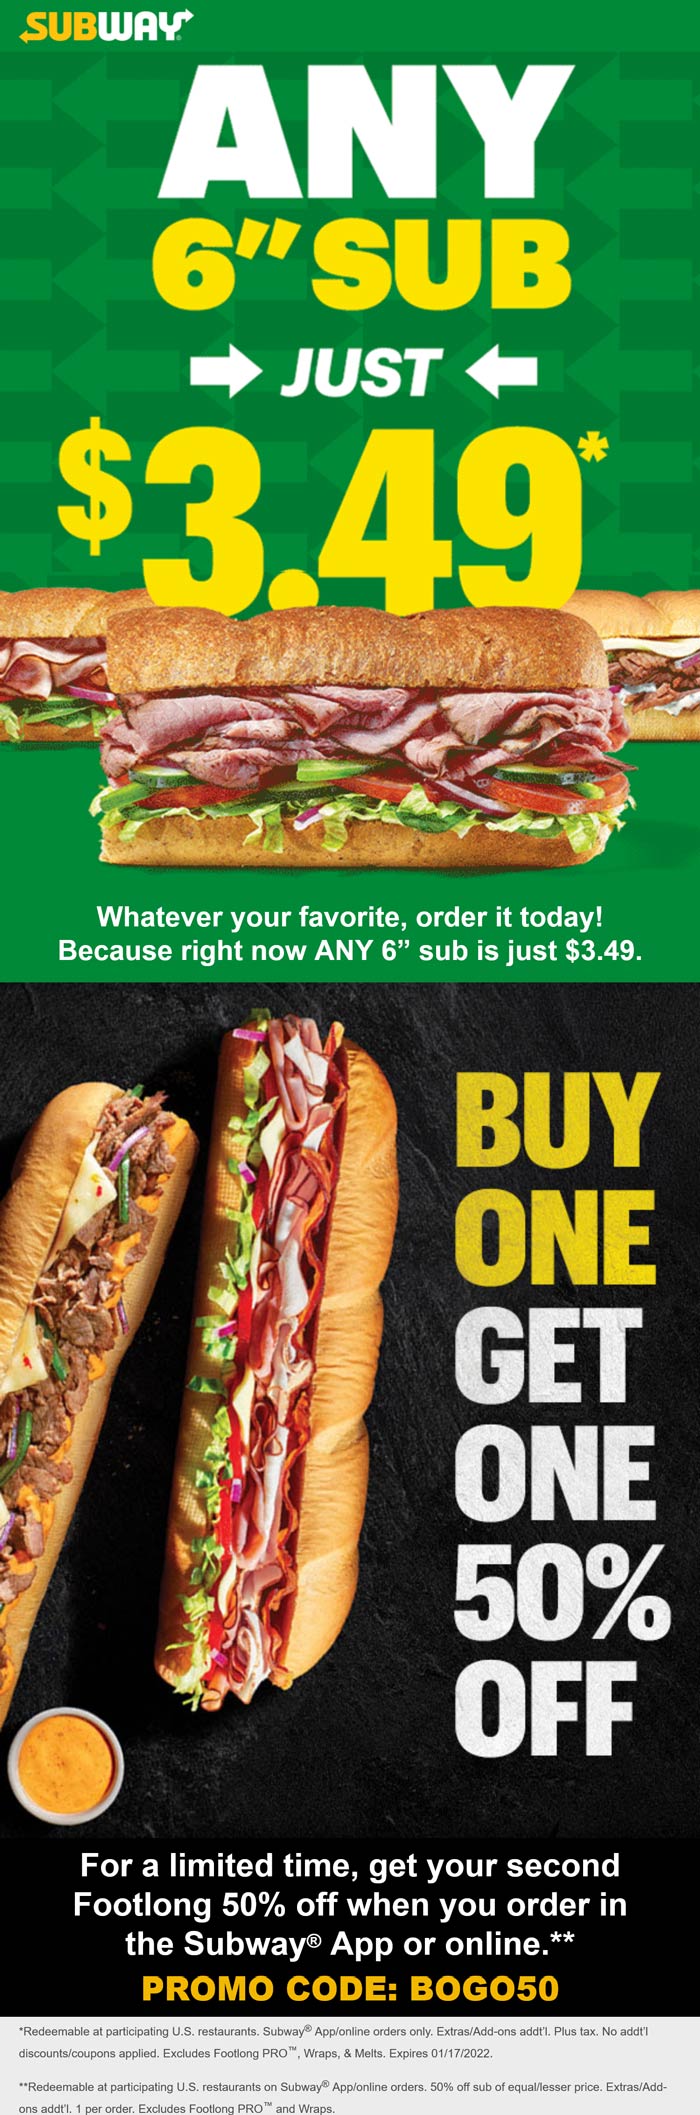 Subway restaurants Coupon  Any 6in sub sandwich = $3.49 online at Subway, also second footlong 50% off via promo BOGO50 #subway 